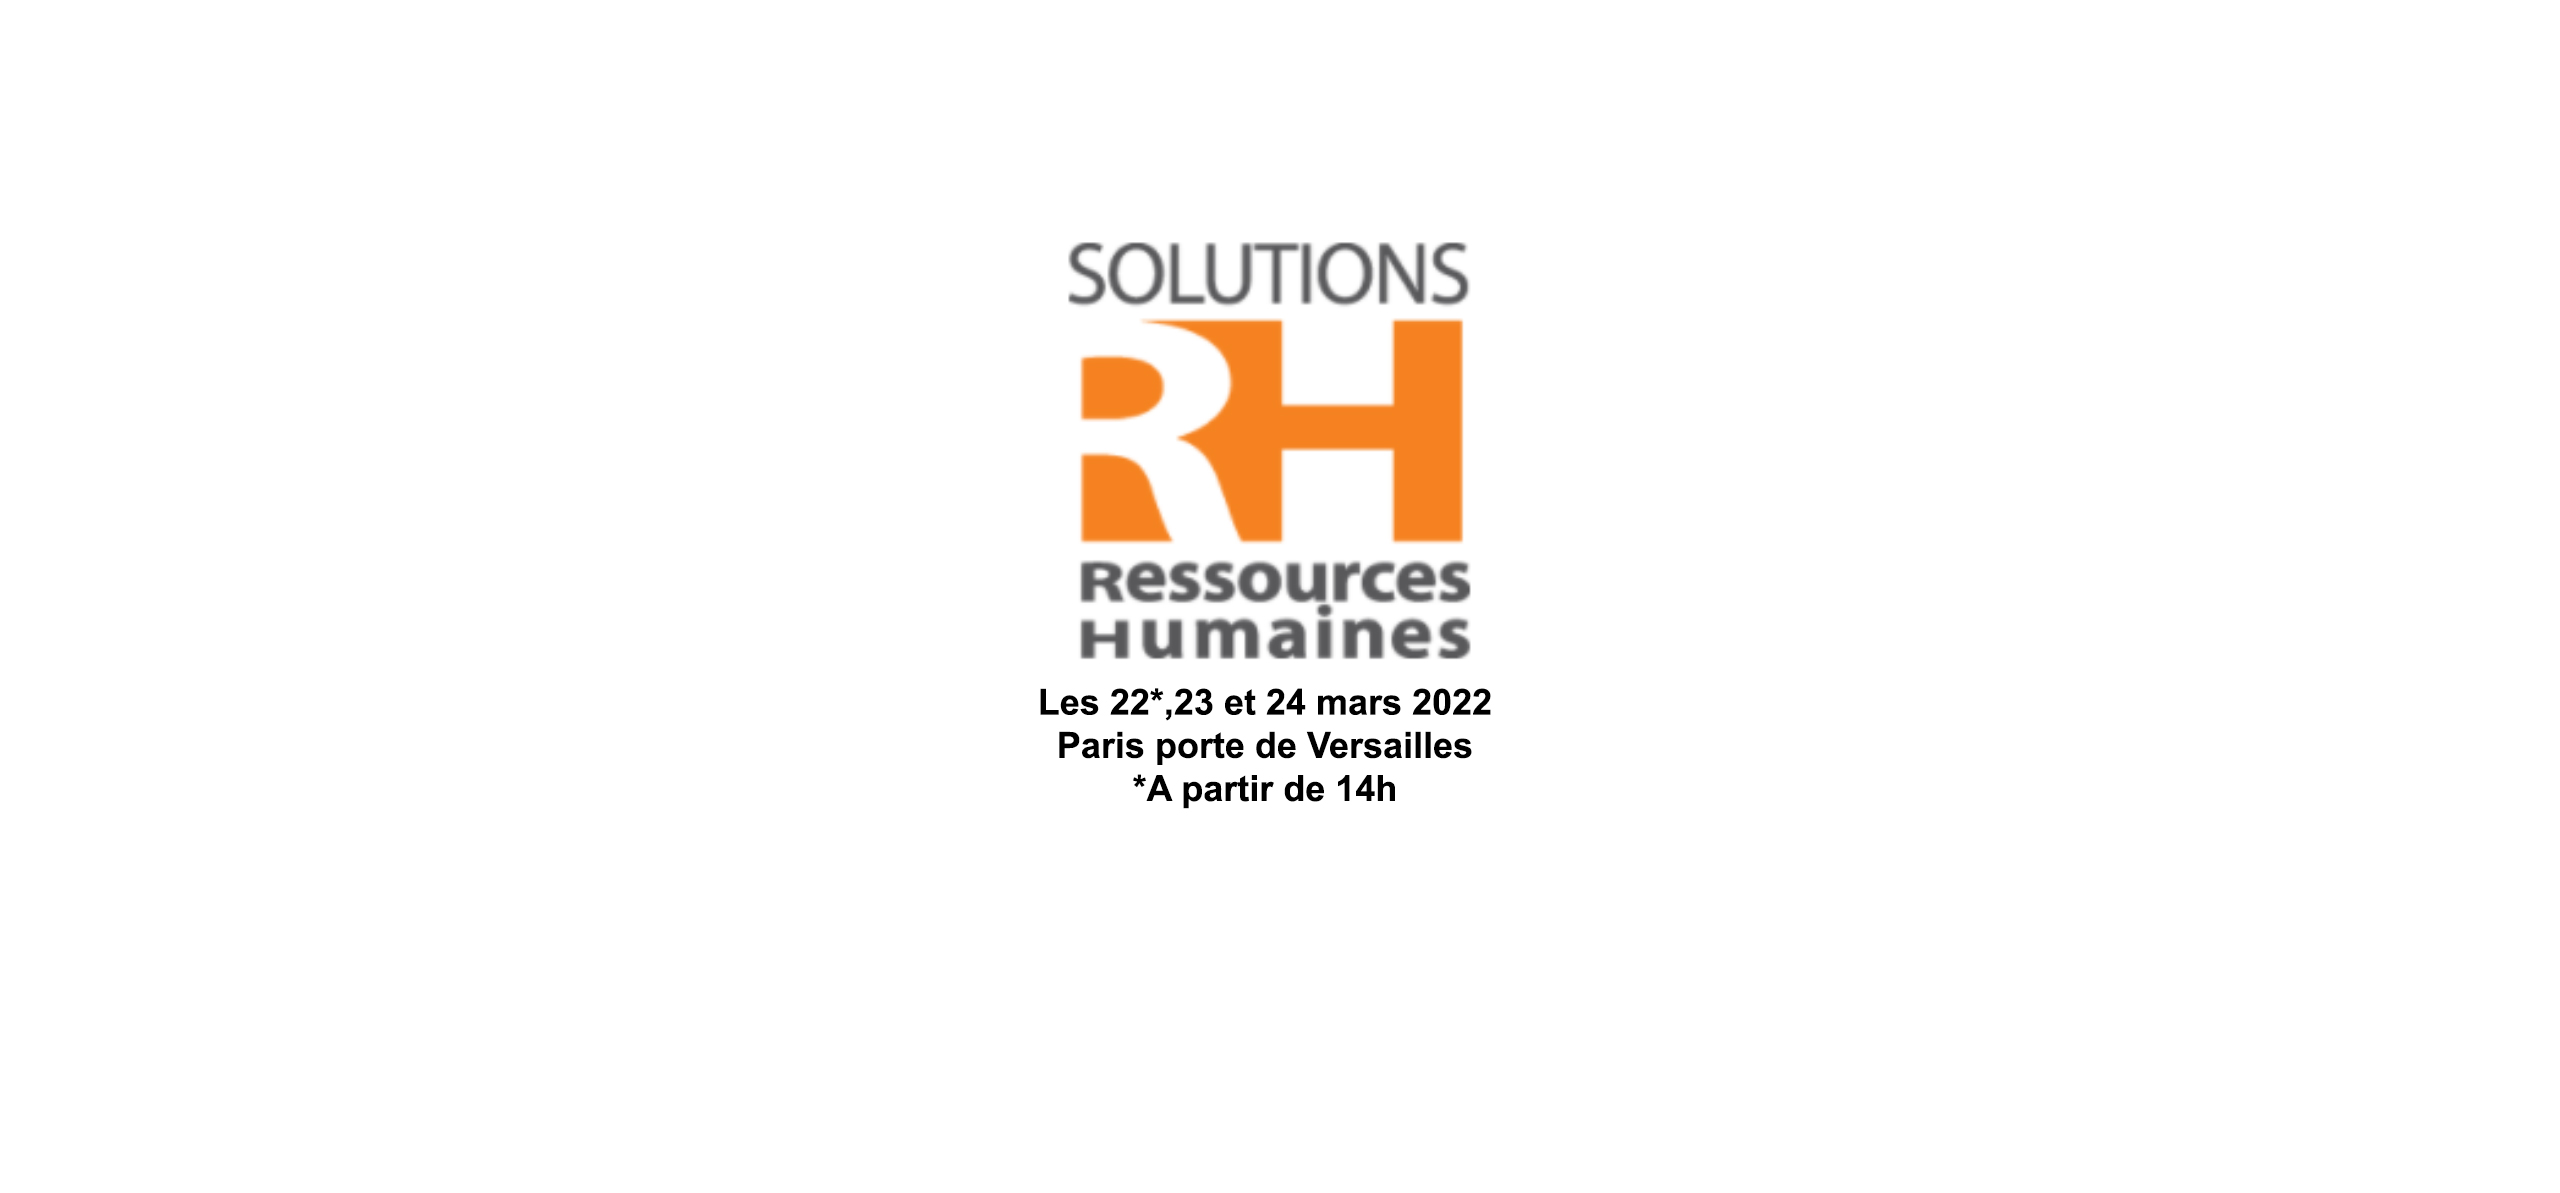 You are currently viewing Salon des solutions des ressources humaines